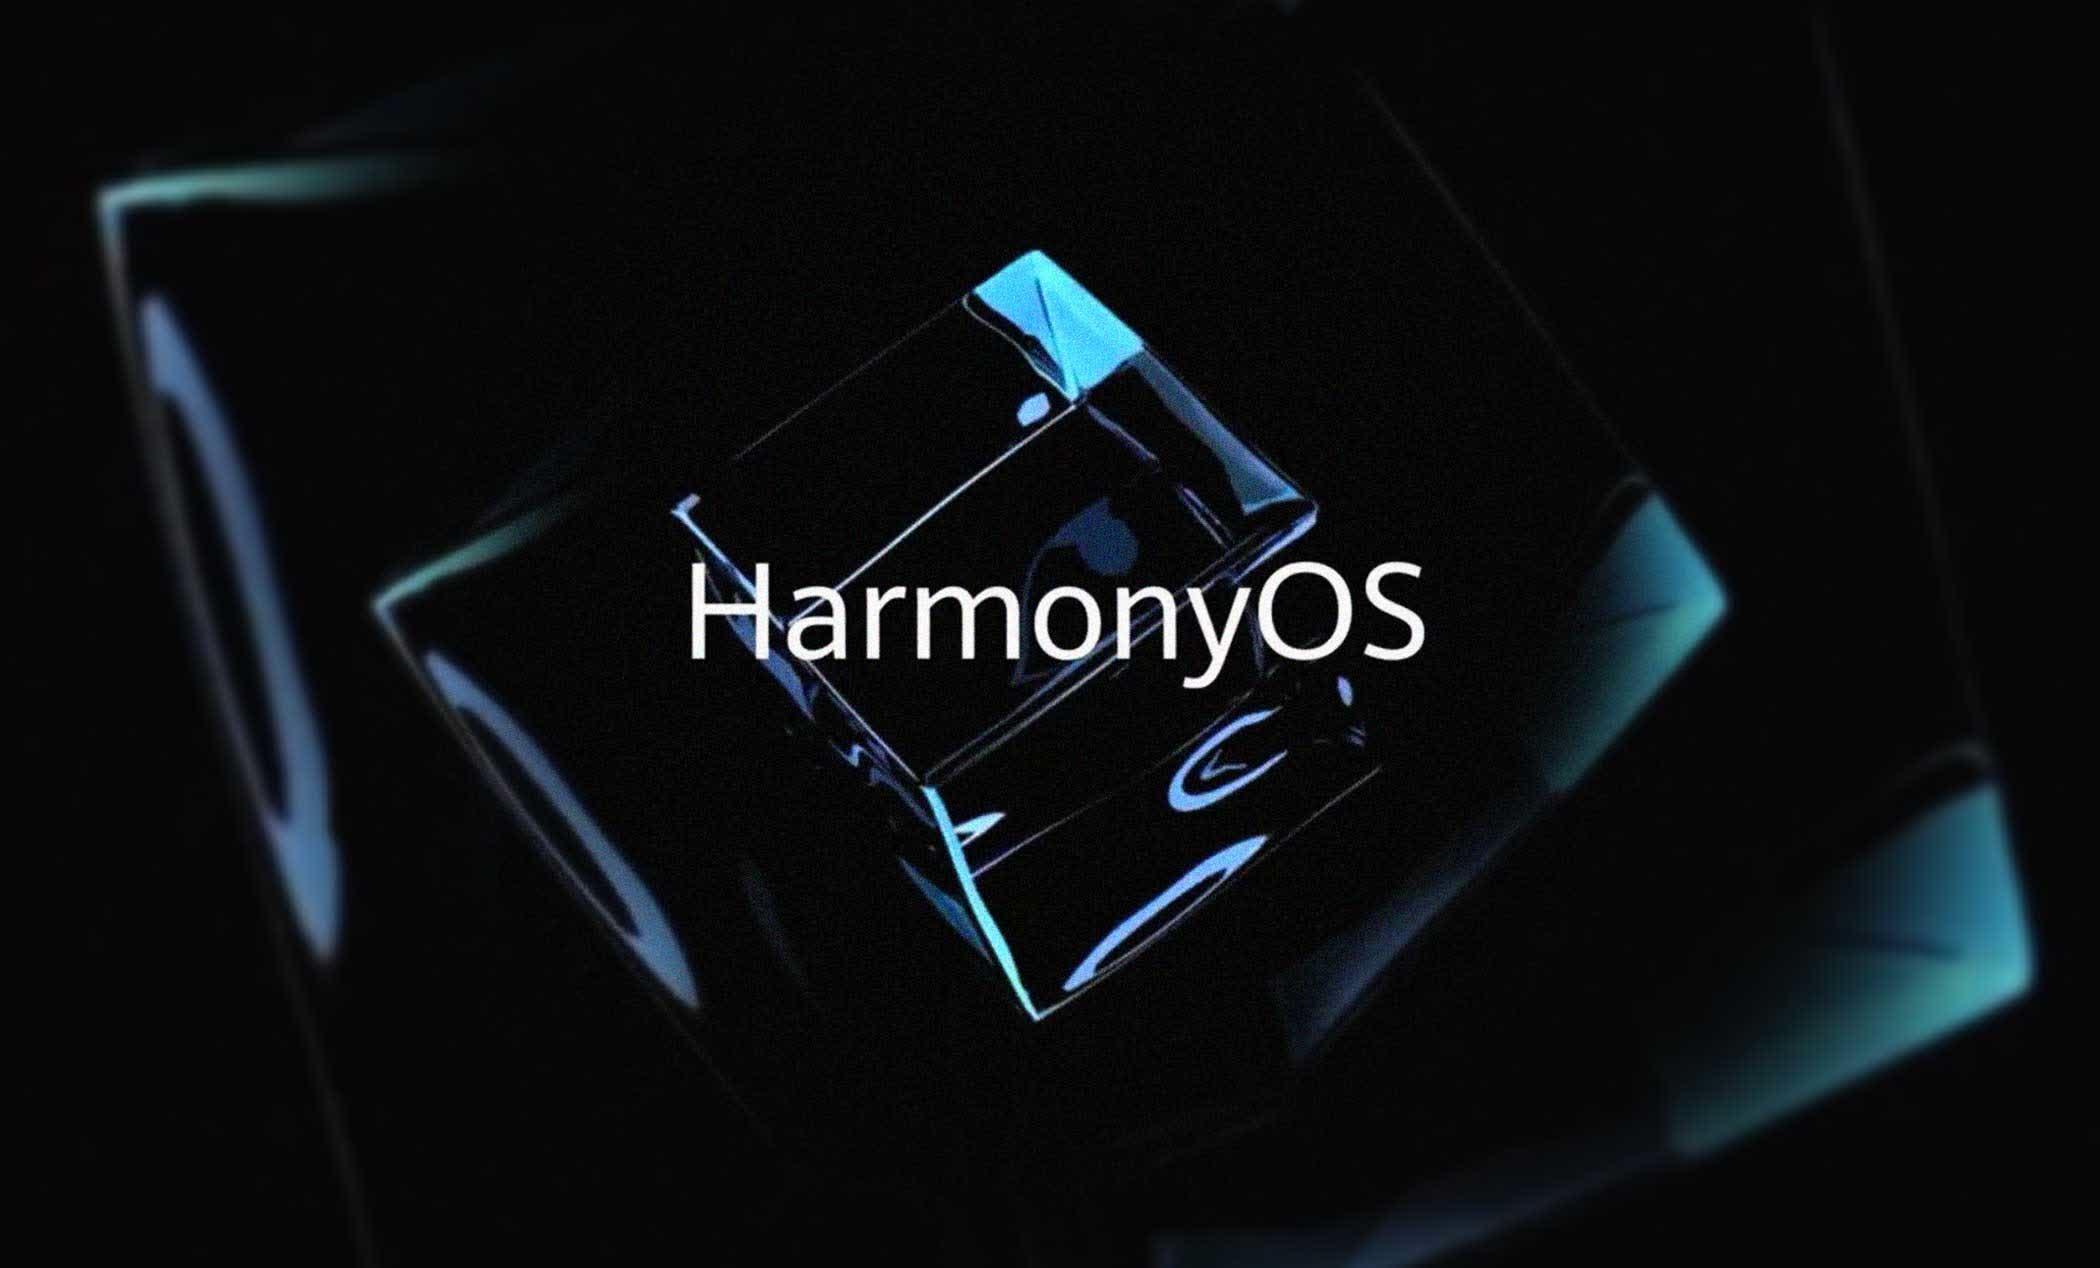 Huawei to launch first mobile devices powered by HarmonyOS 2.0 on June 2